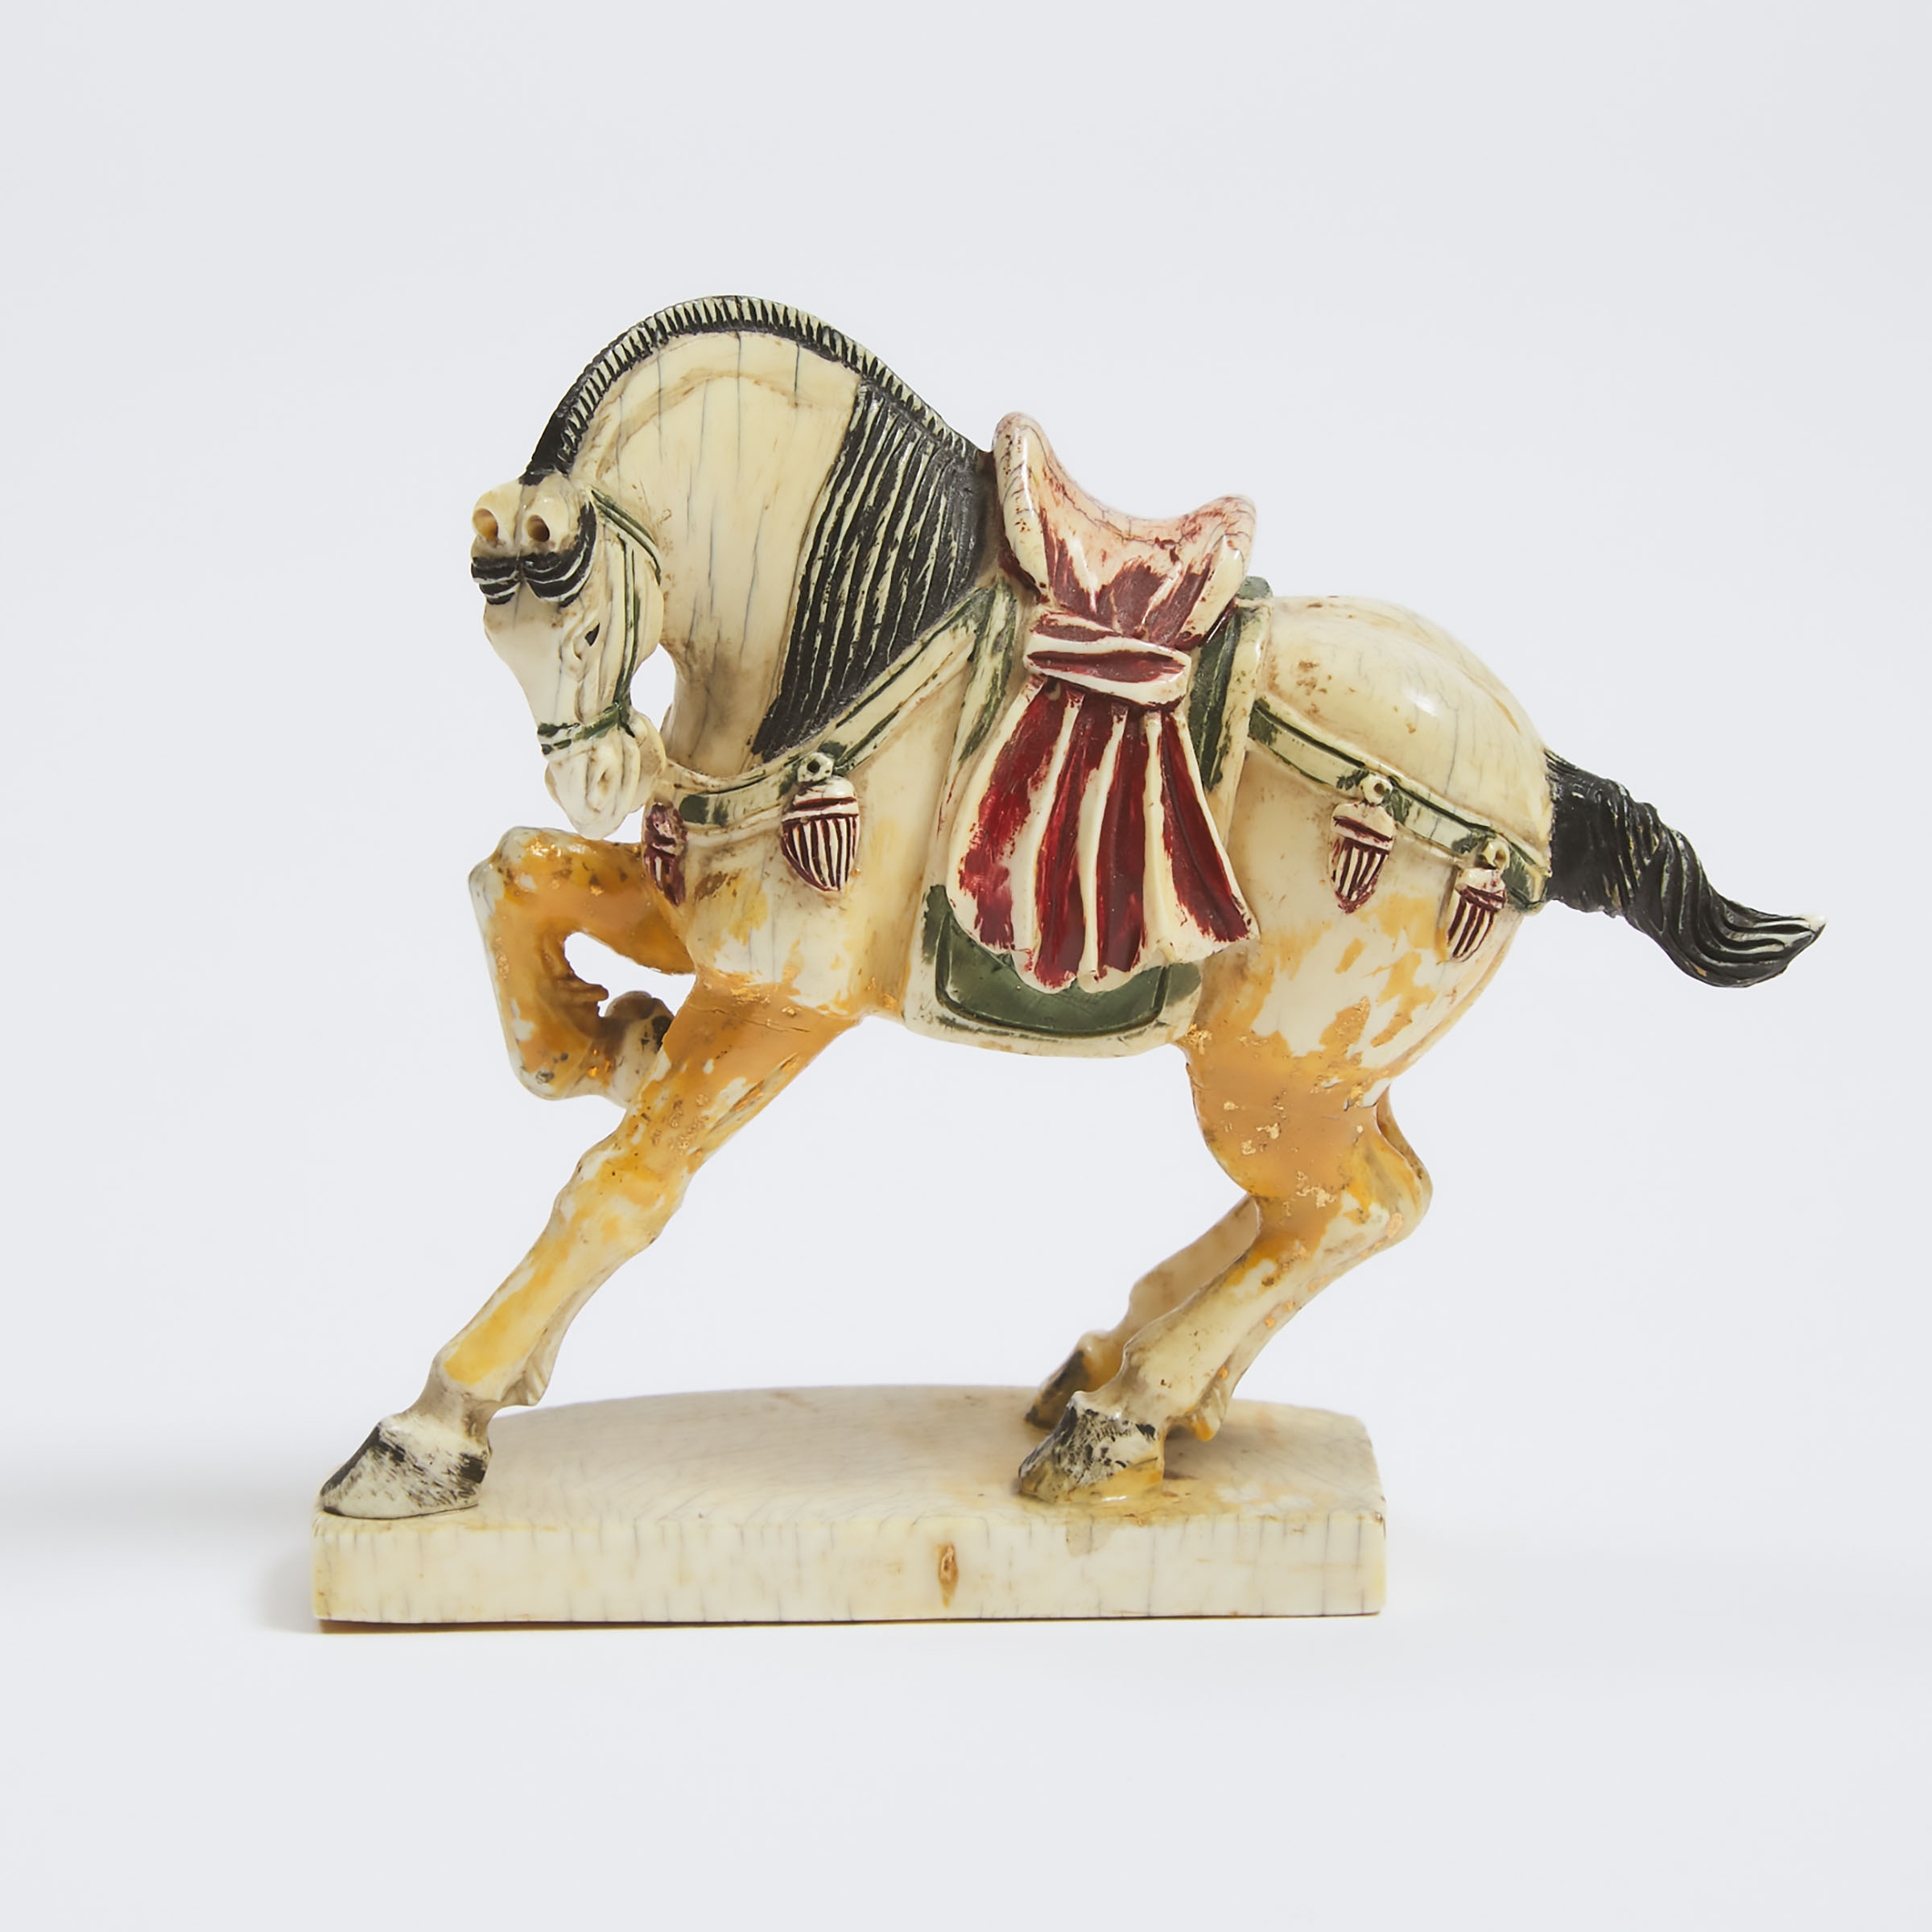 A Polychrome Ivory Figure of a Horse, 19th Century